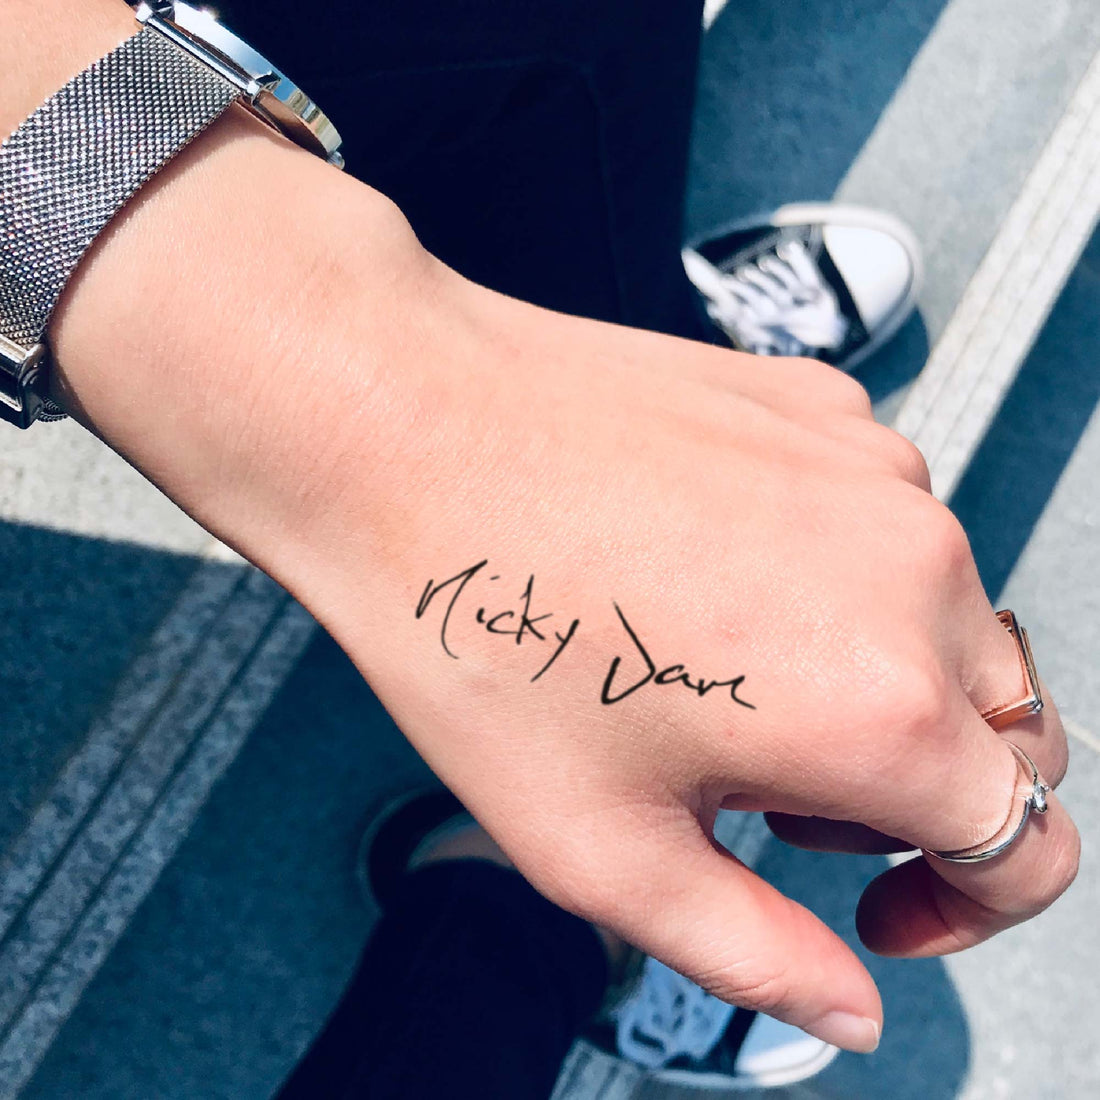 Nicky Jam custom temporary tattoo sticker design idea inspiration meanings removal arm wrist hand words font name signature calligraphy lyrics tour concert outfits merch accessory gift souvenir costumes wear dress up code